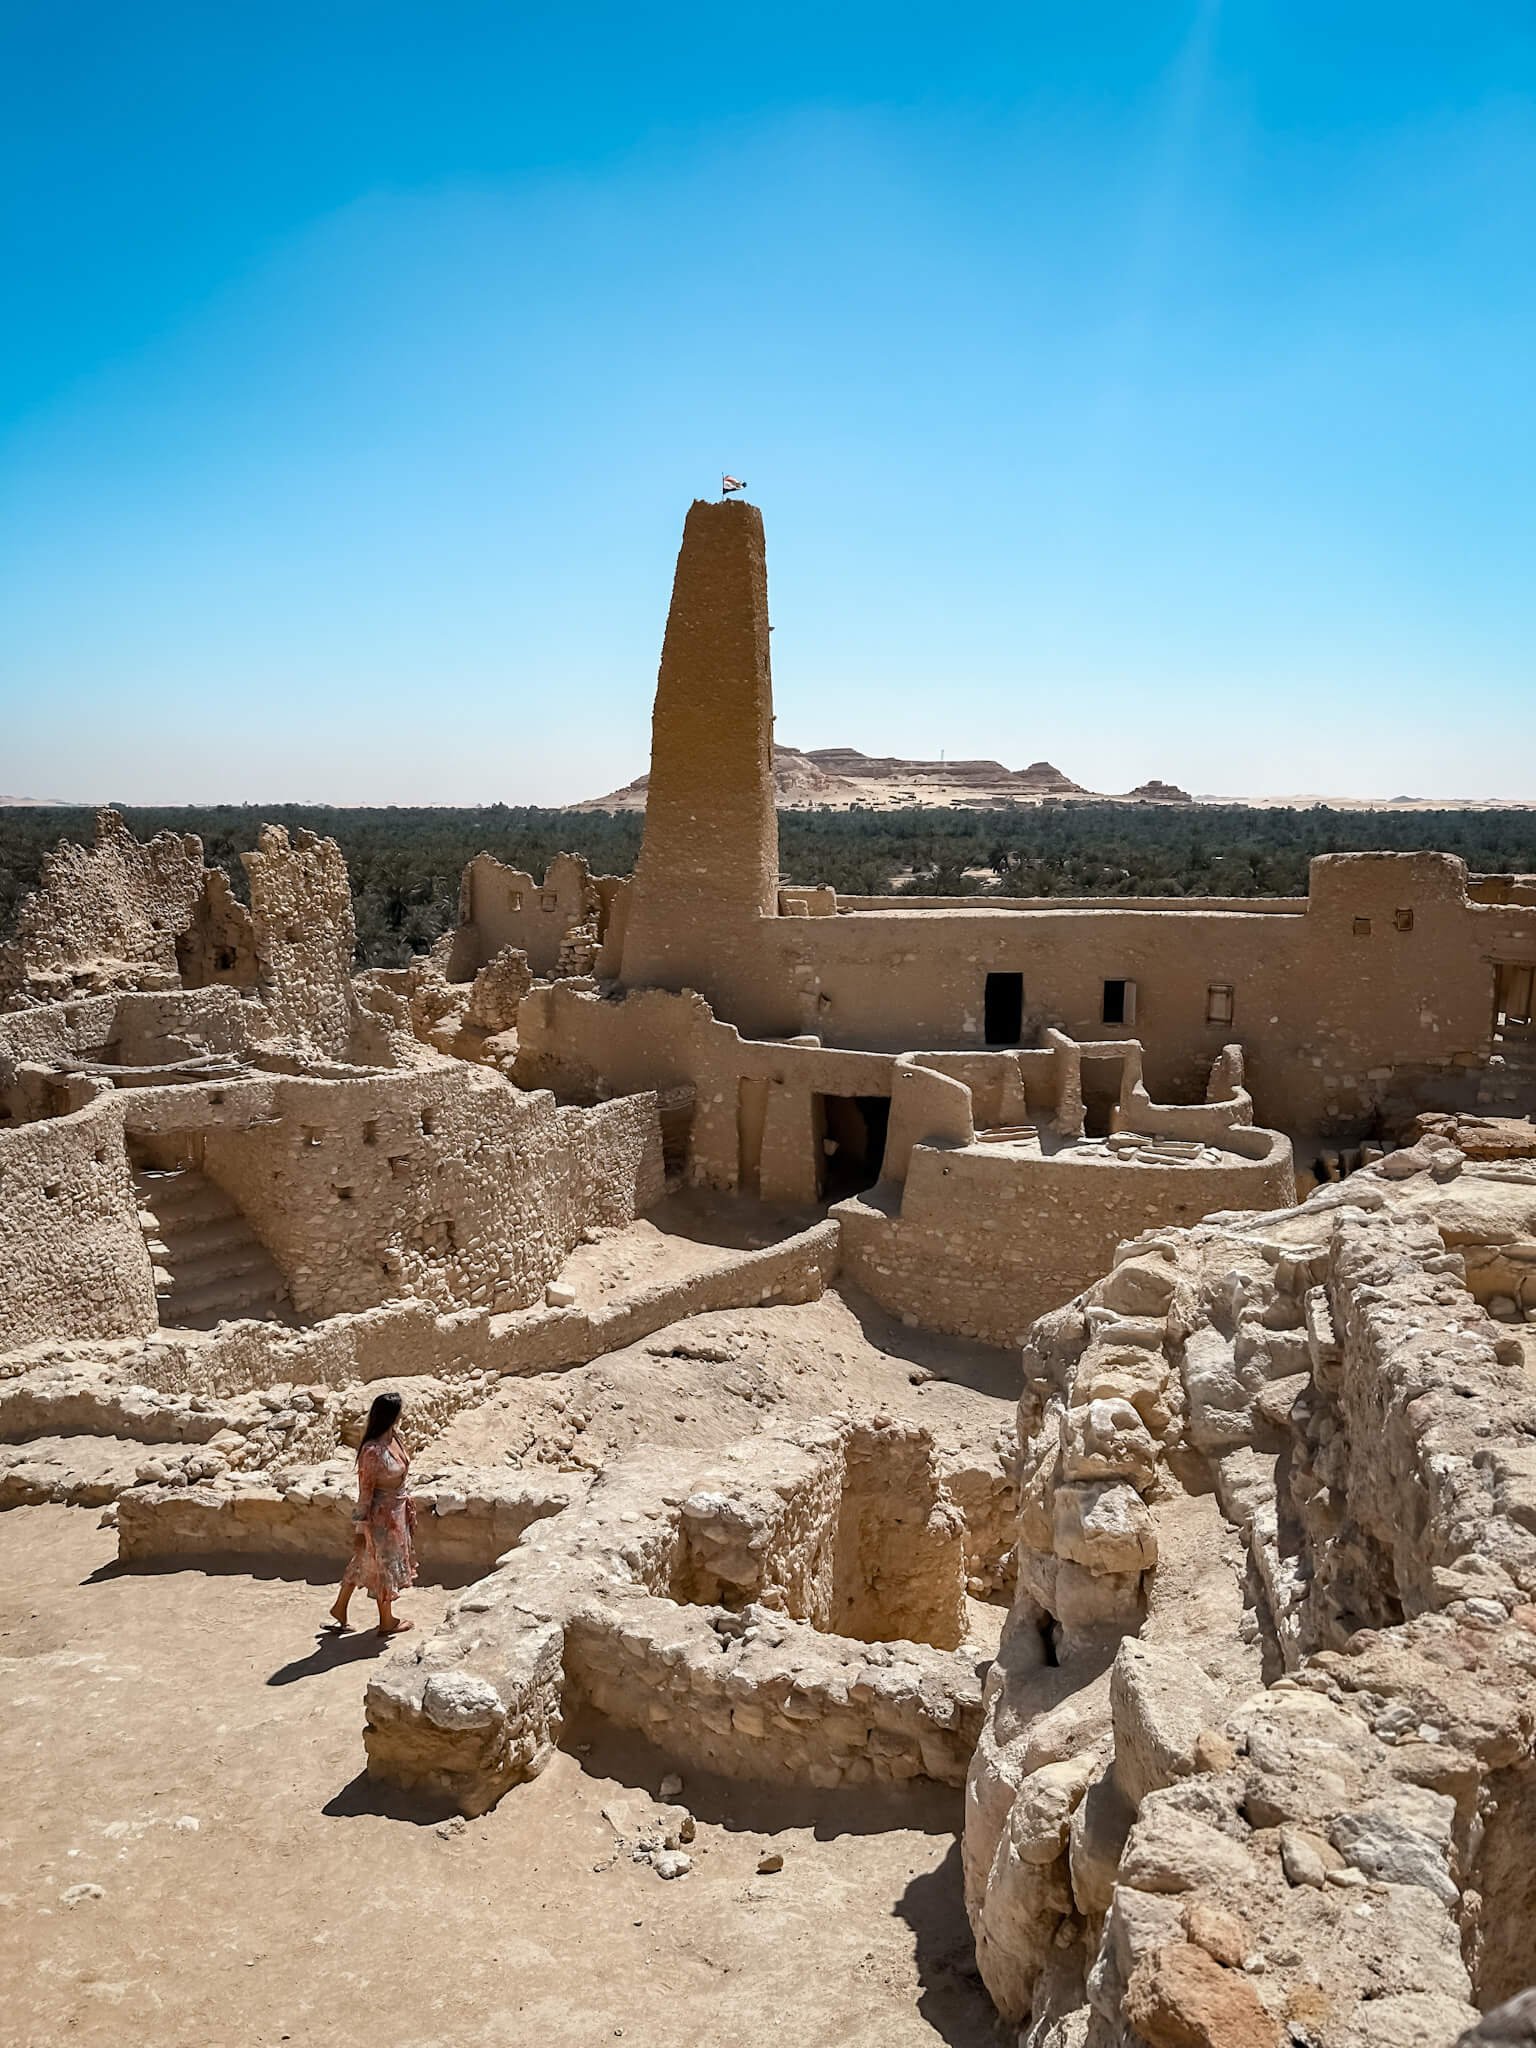 Temple of the oracle, things to do in Siwa, Egypt